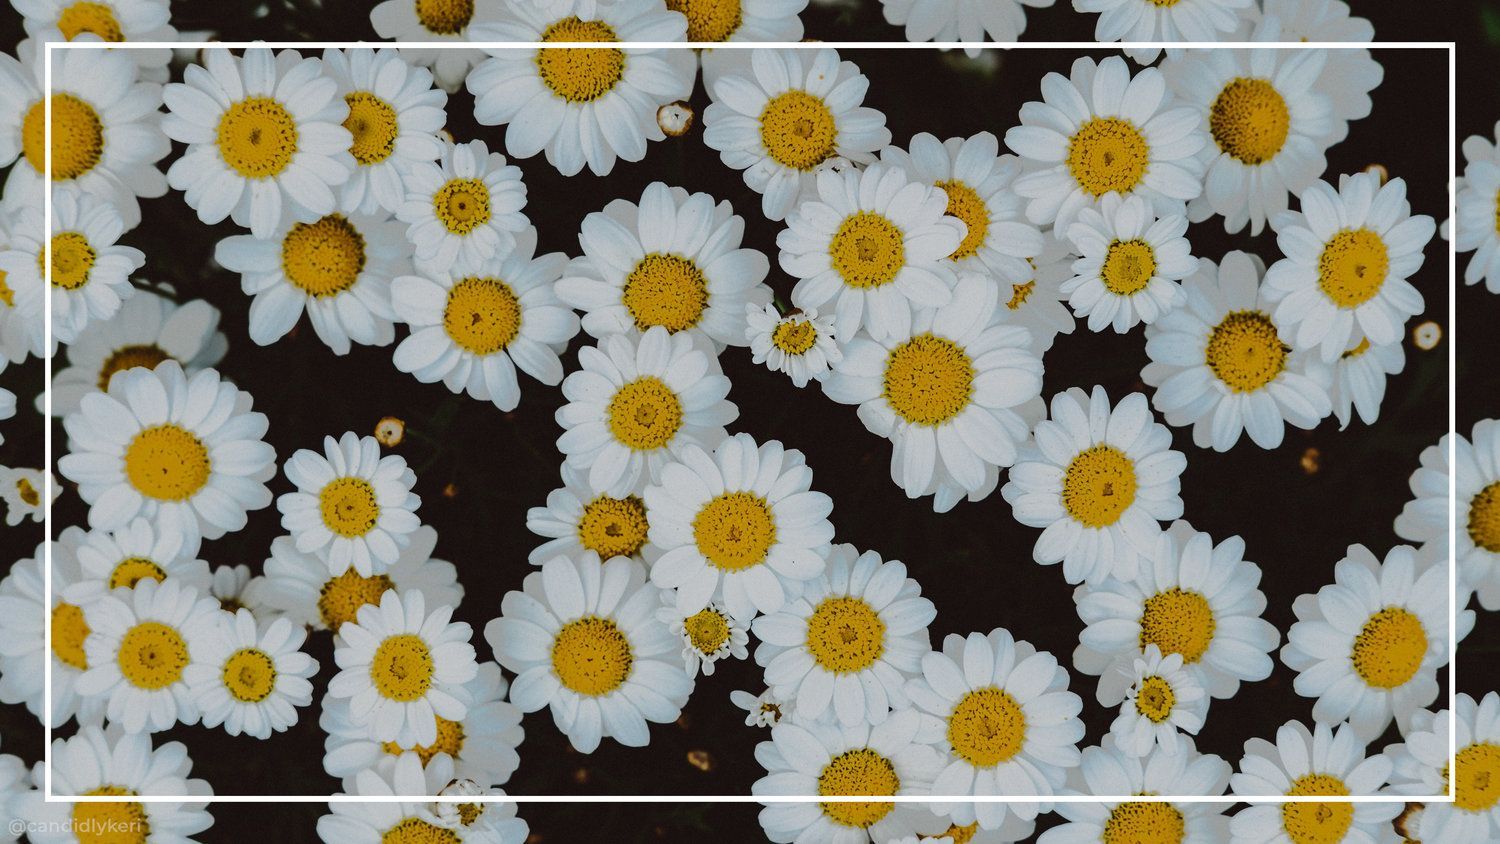 Daisy Aesthetic Computer Wallpaper Free Daisy Aesthetic Computer Background